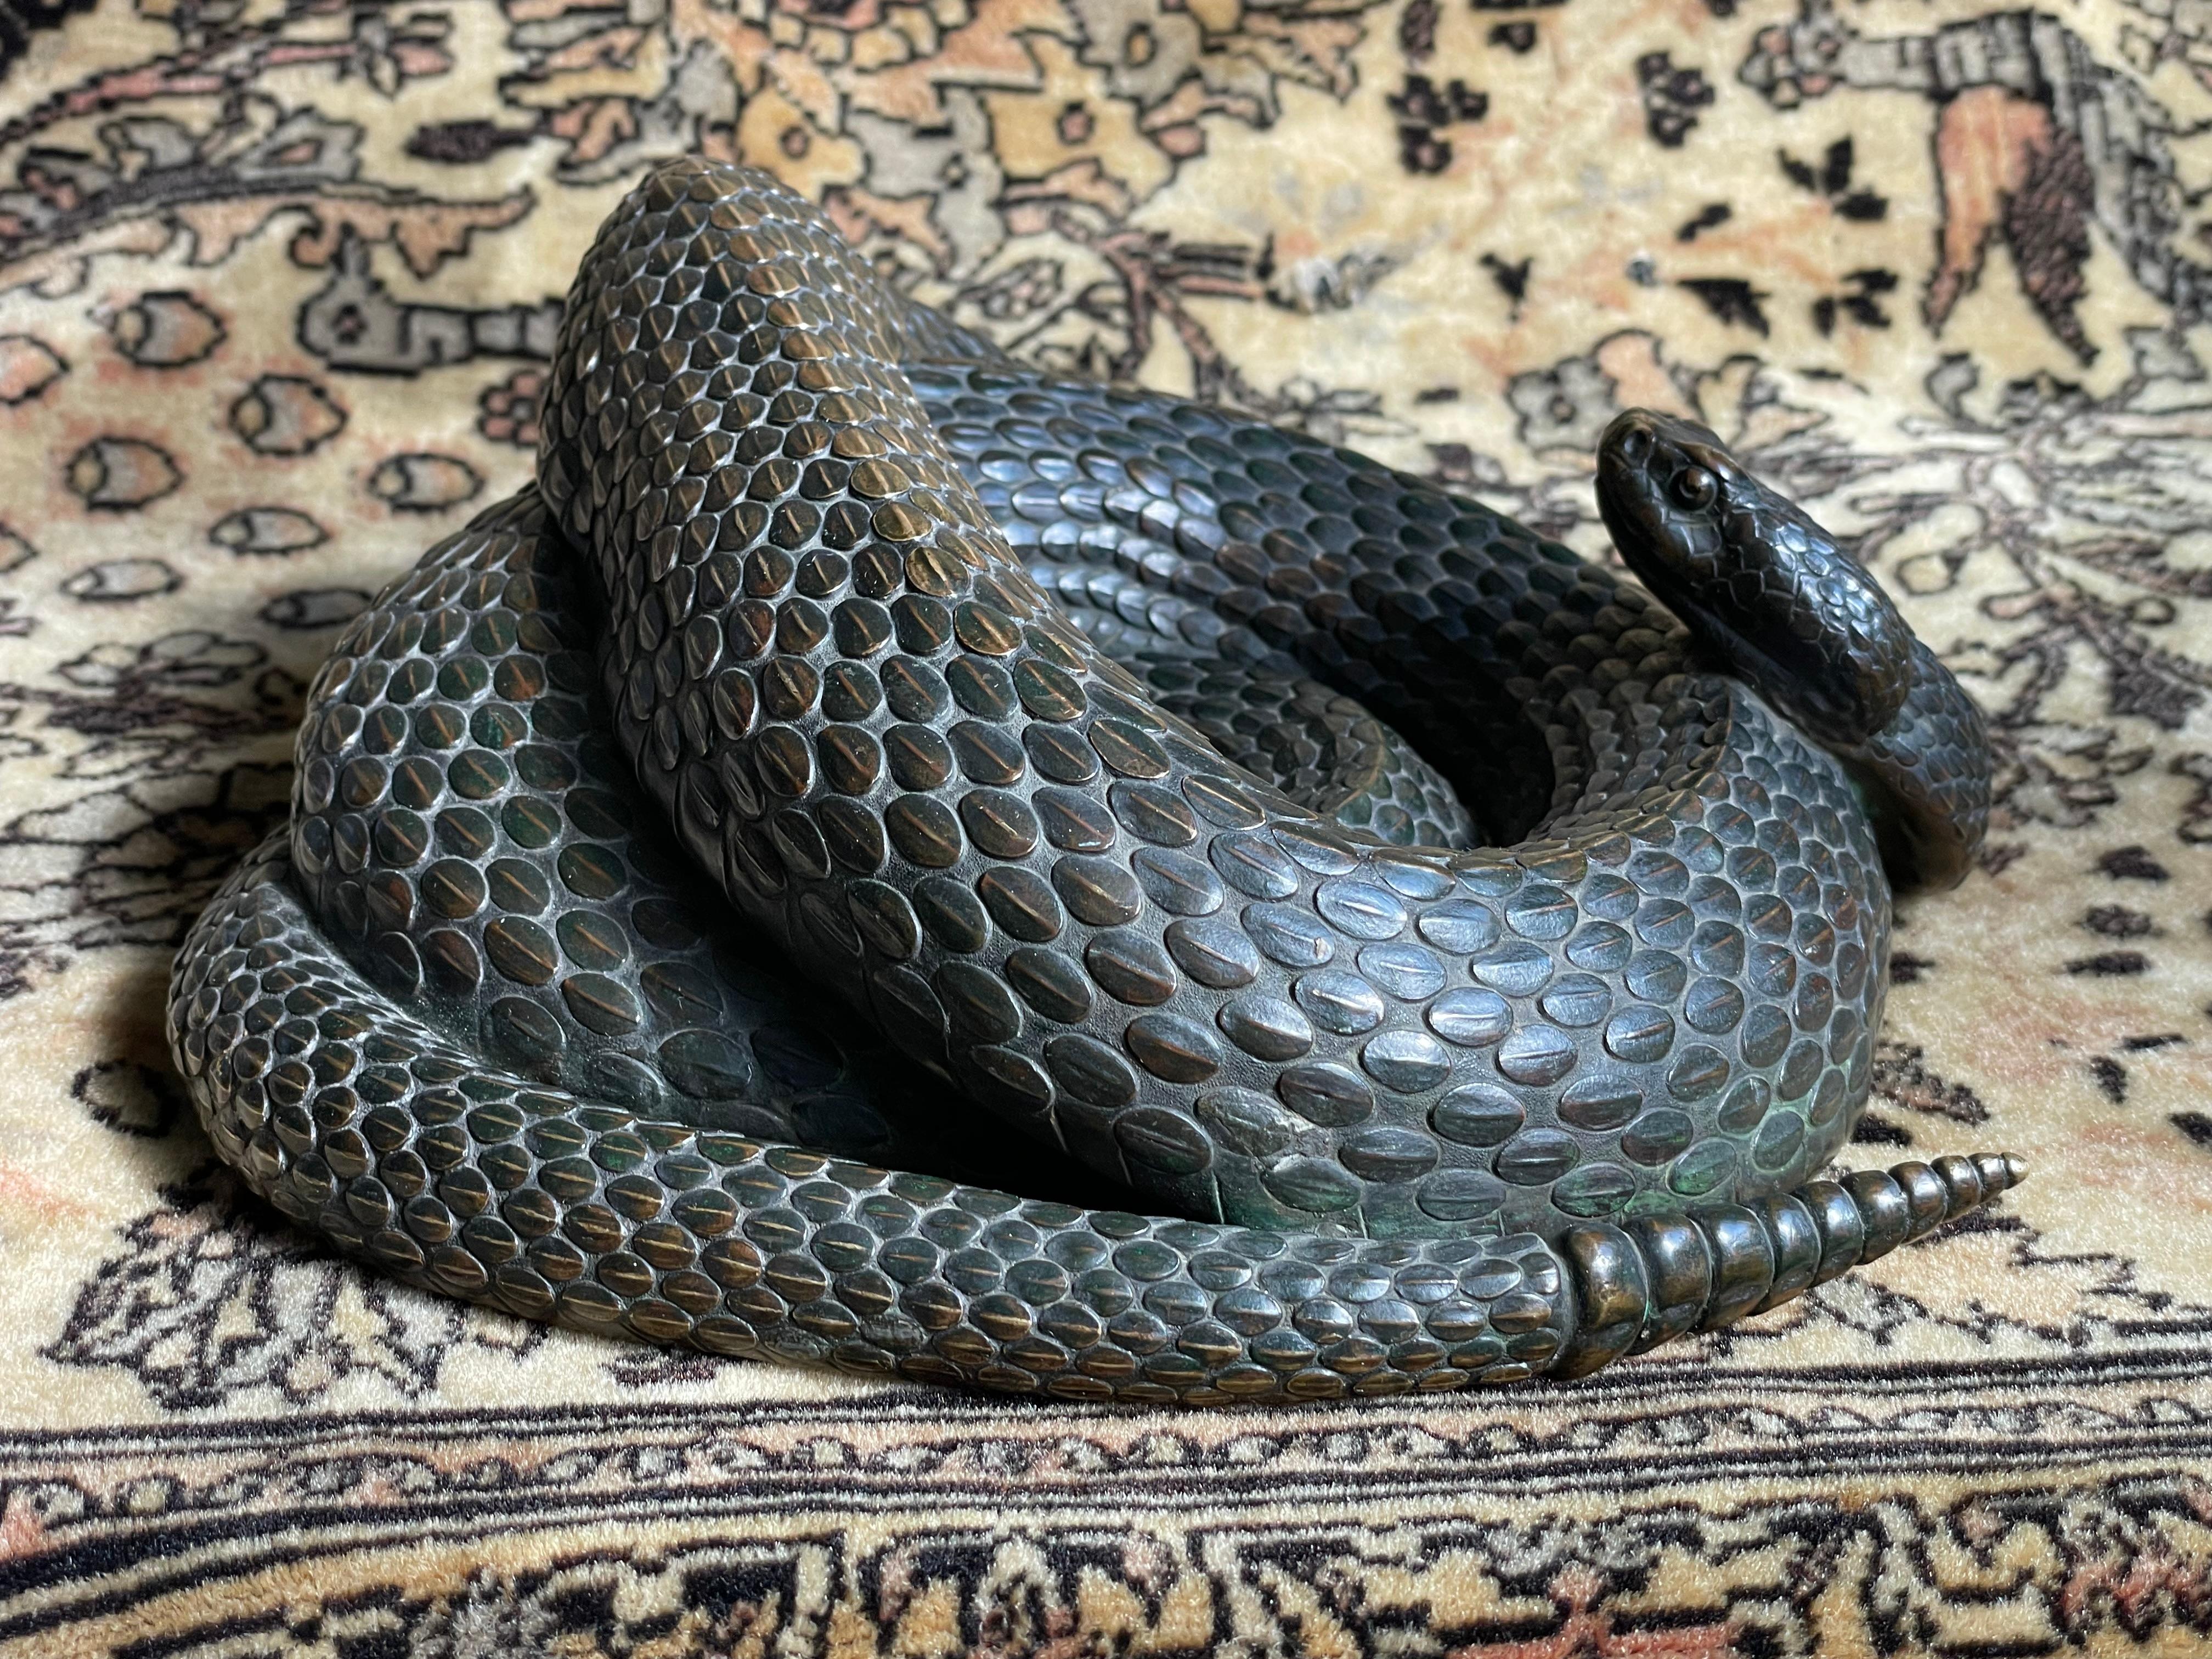 Museum Worthy Antique Bronze Coiled Rattlesnake Sculpture Signed & Marked 1885  For Sale 6